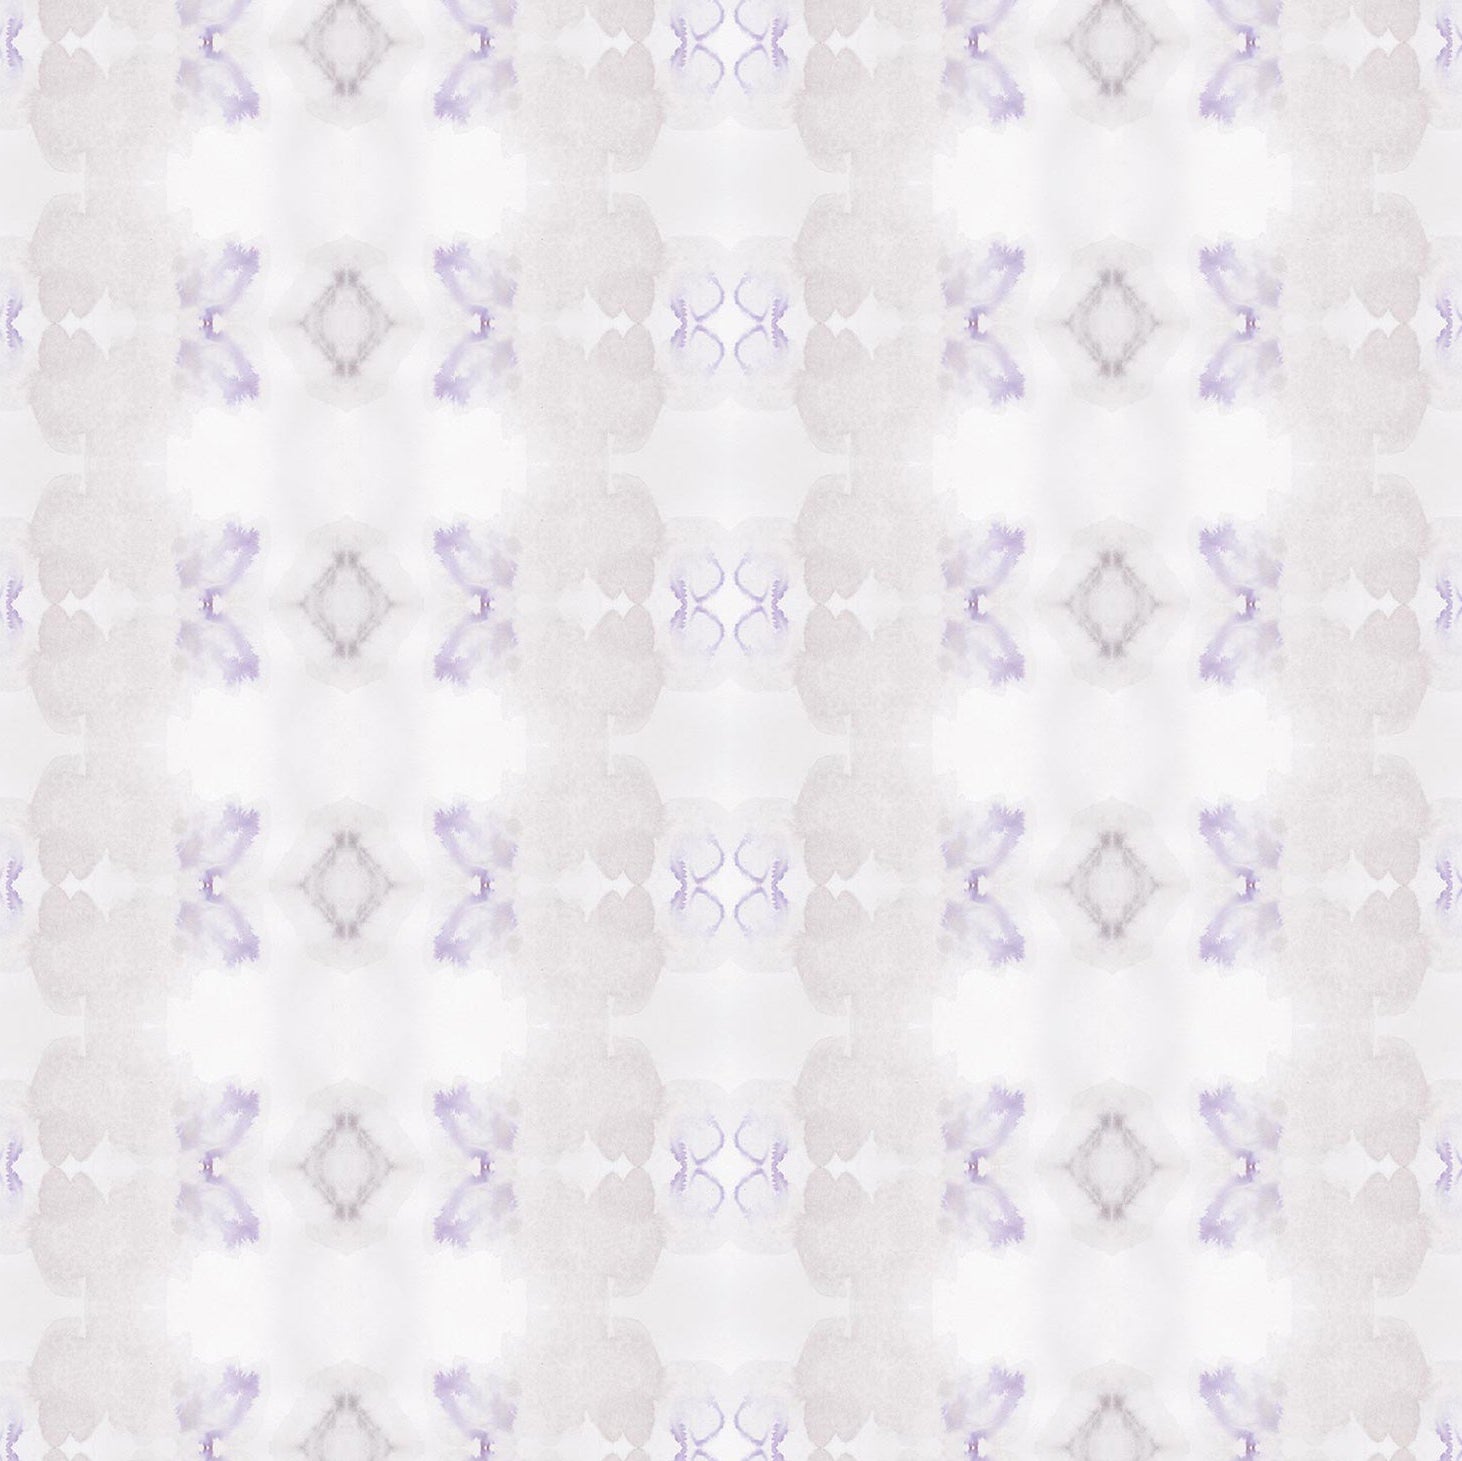 Detail of wallpaper in a striped ink blot print in shades of tan and purple on a cream field.